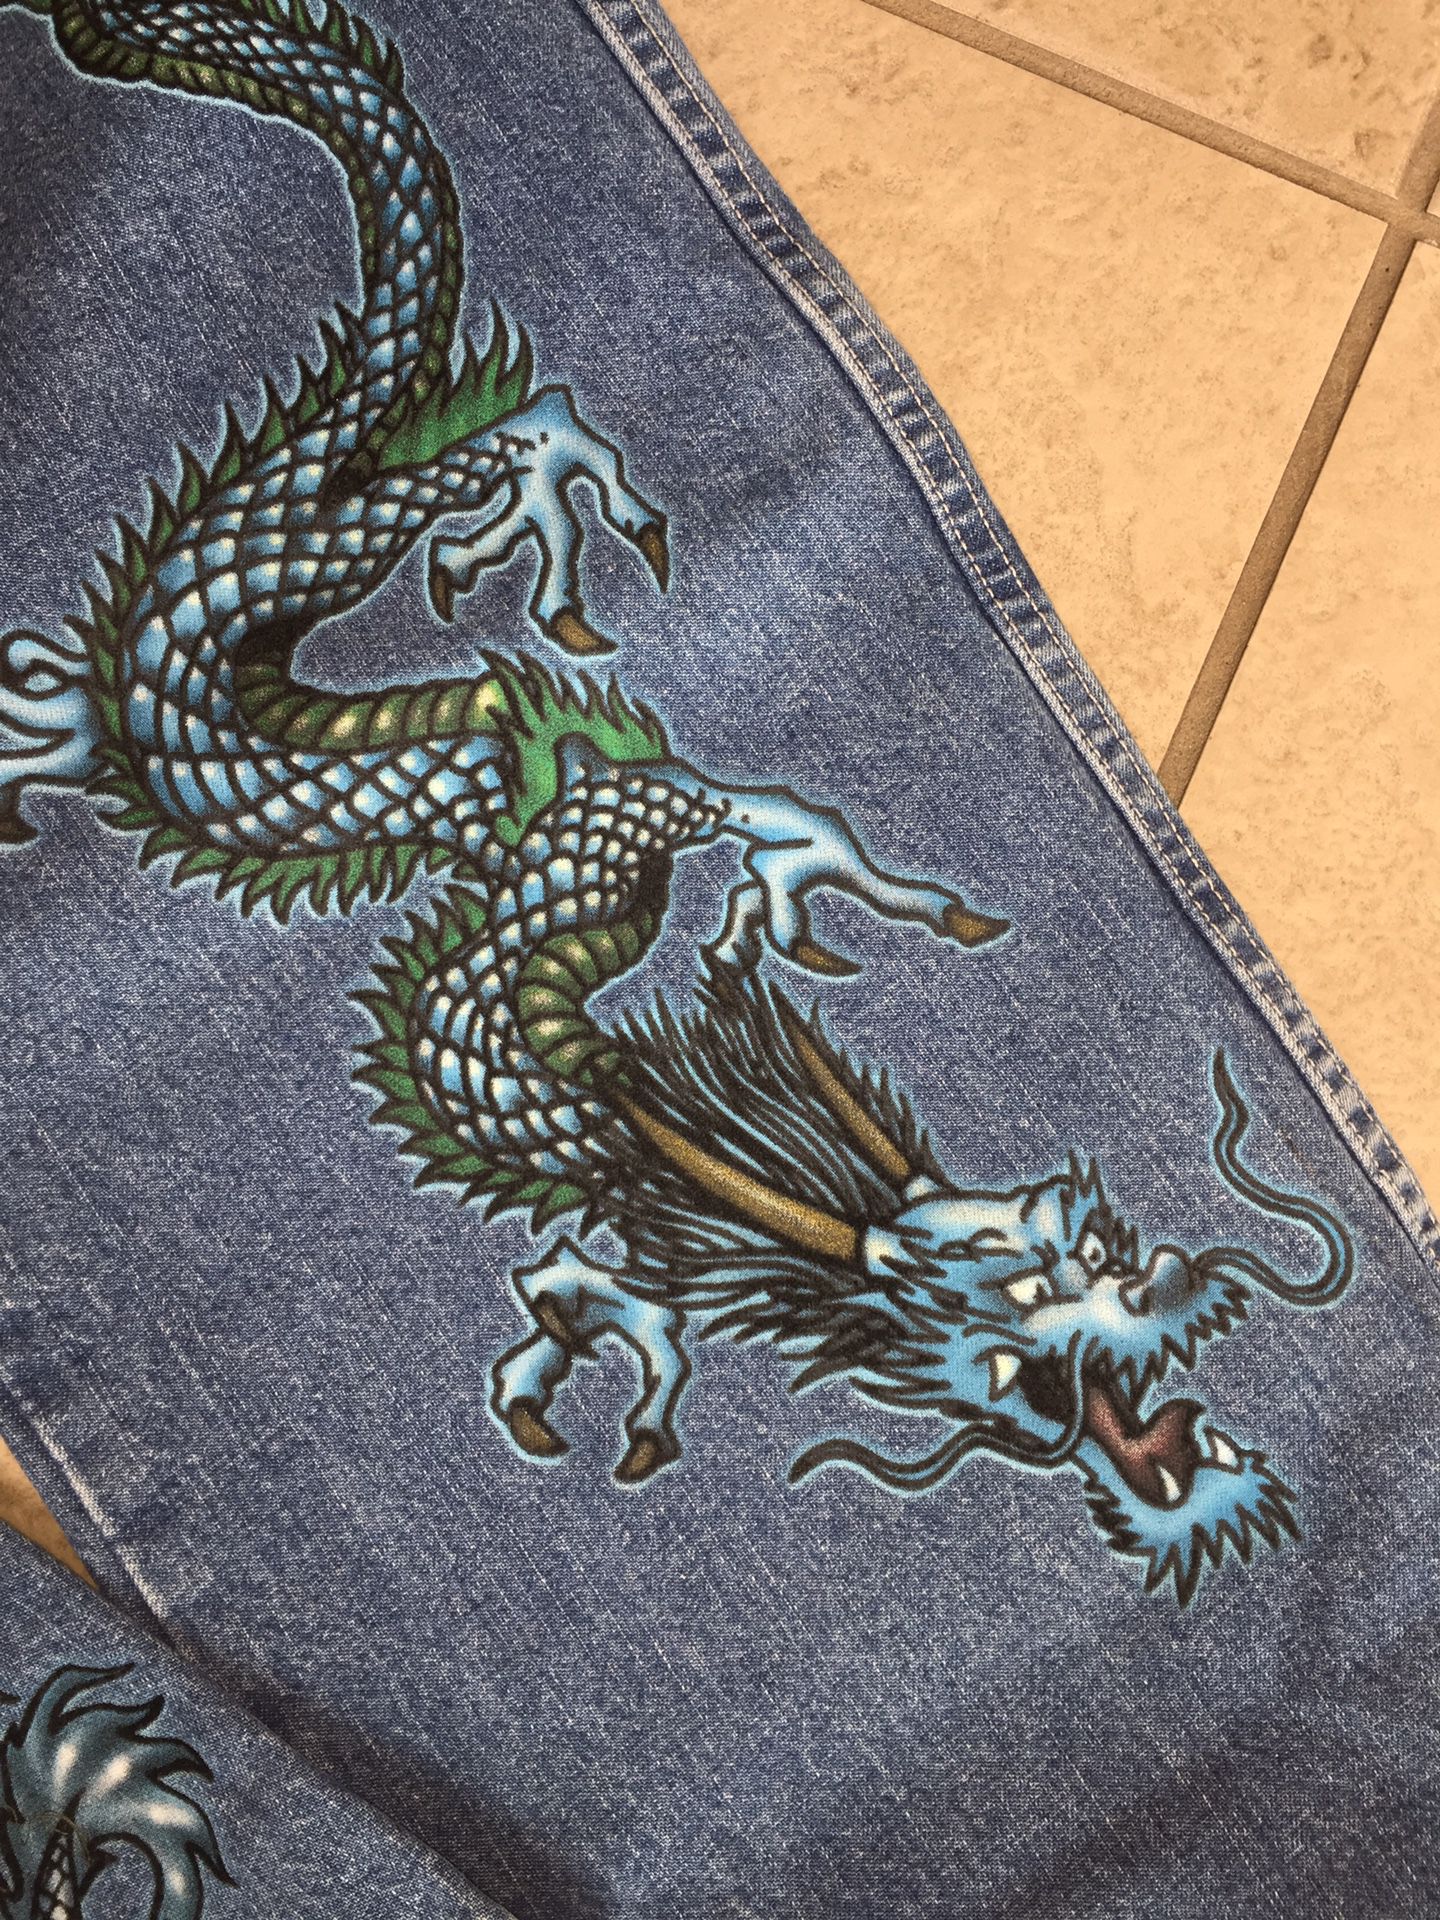 JNCO Jeans -Dragon Style for Sale in Katy, TX - OfferUp